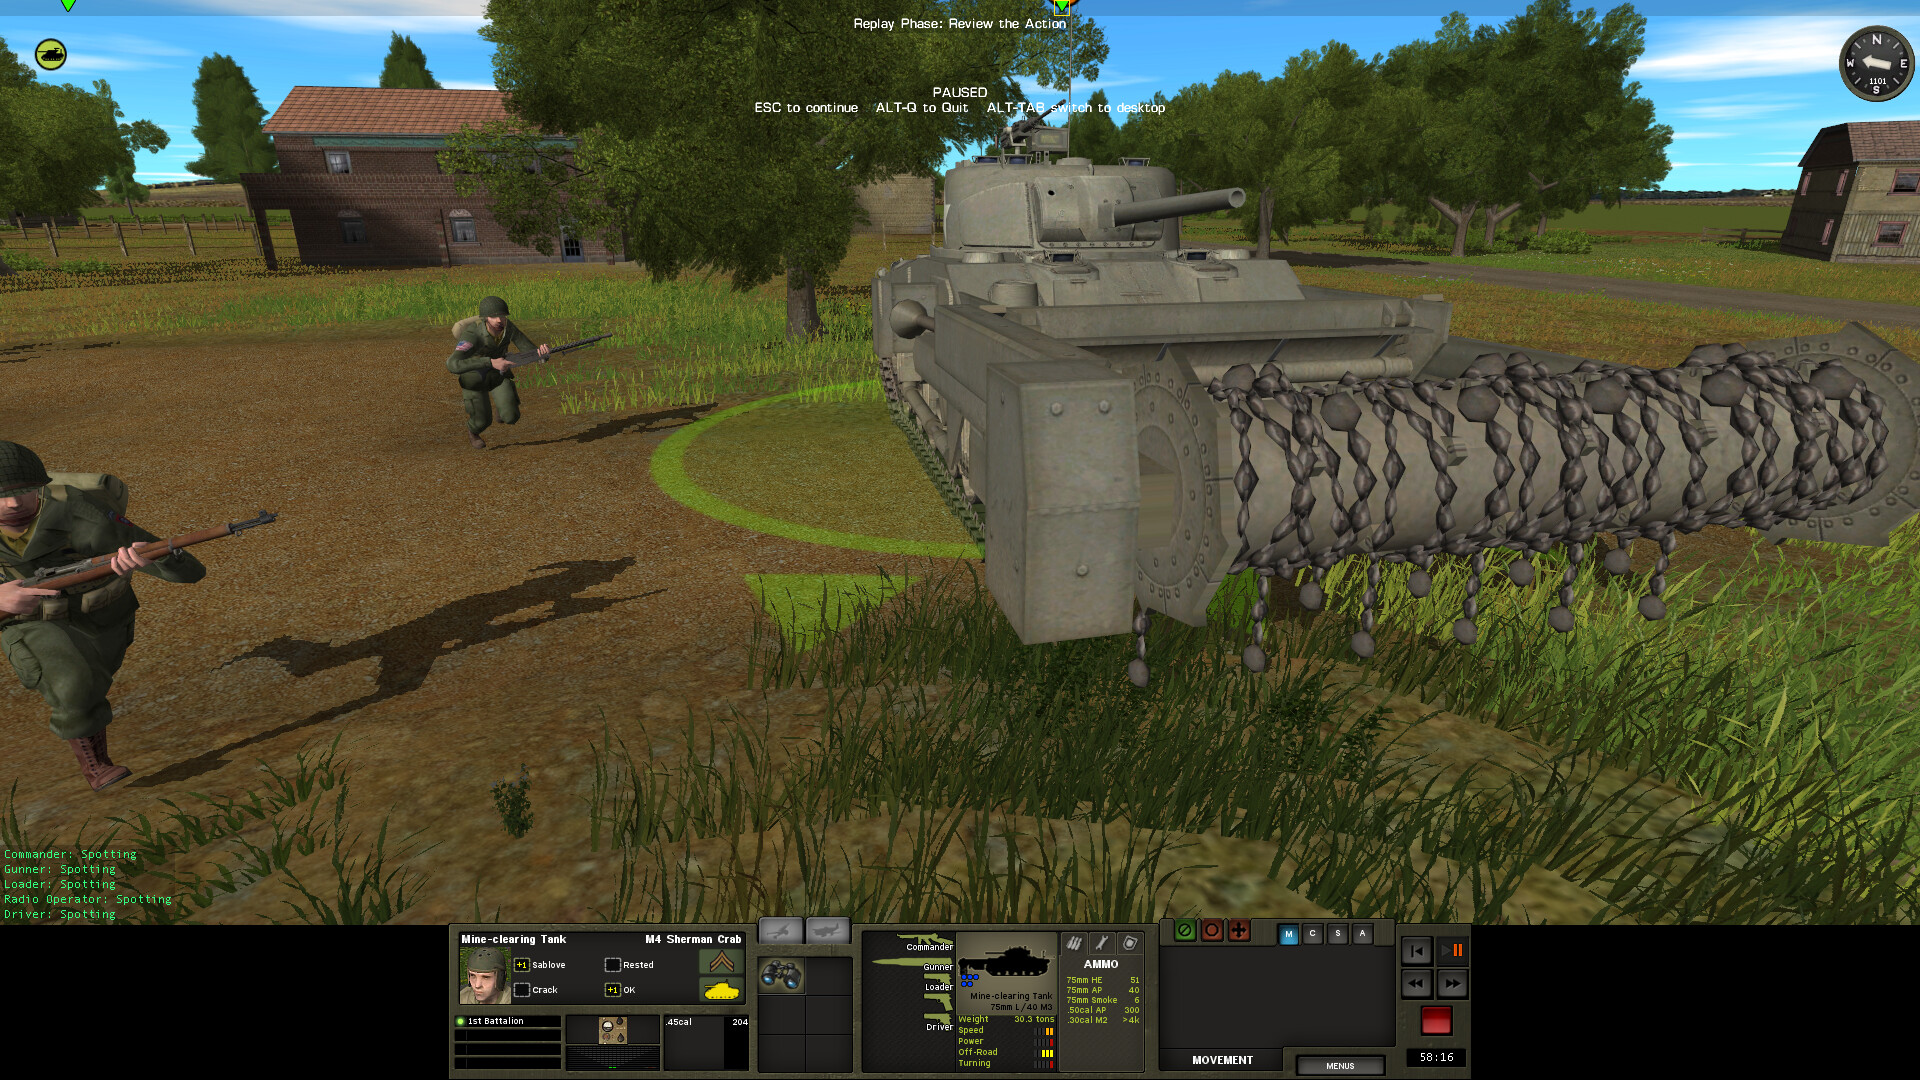 Combat Mission: Battle for Normandy - Vehicle Pack DLC Steam CD Key, 8.95 usd